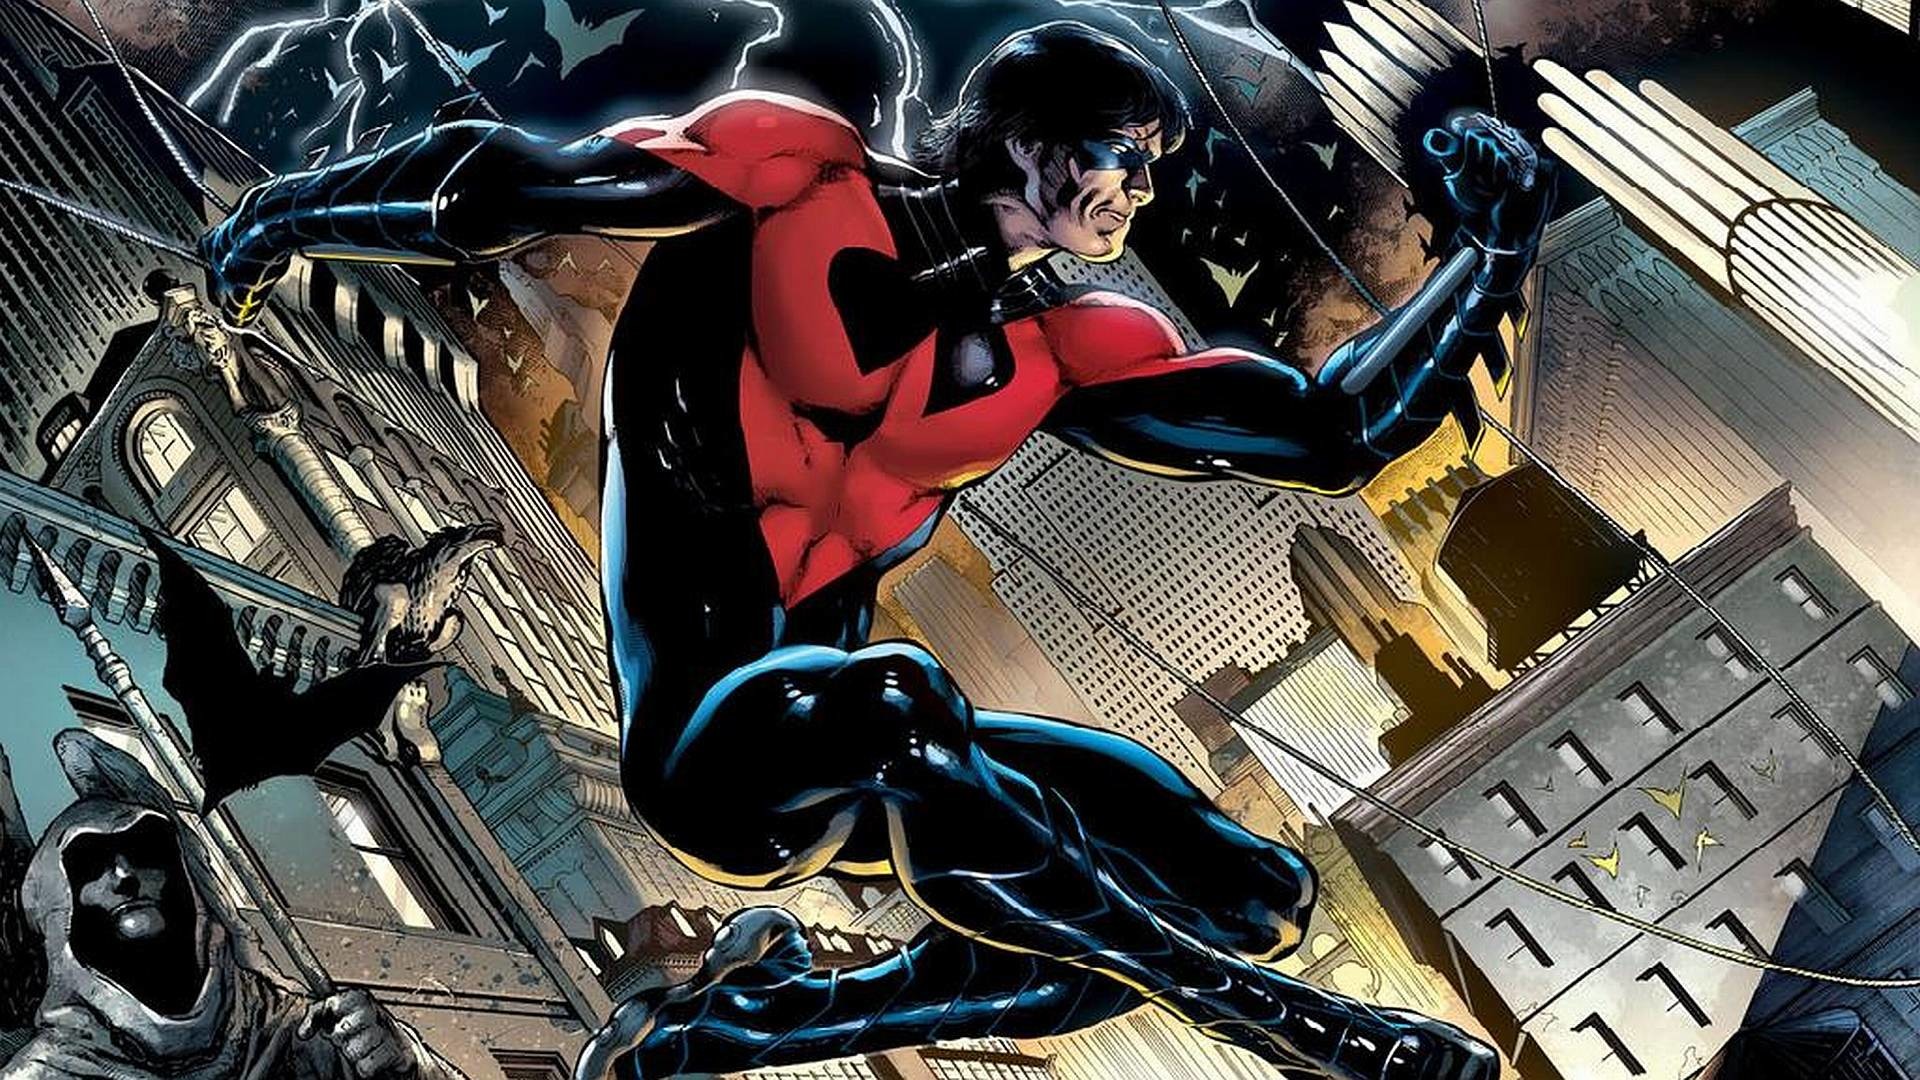 Nightwing Wallpaper 24 258558 Images HD Wallpapers Wallfoy